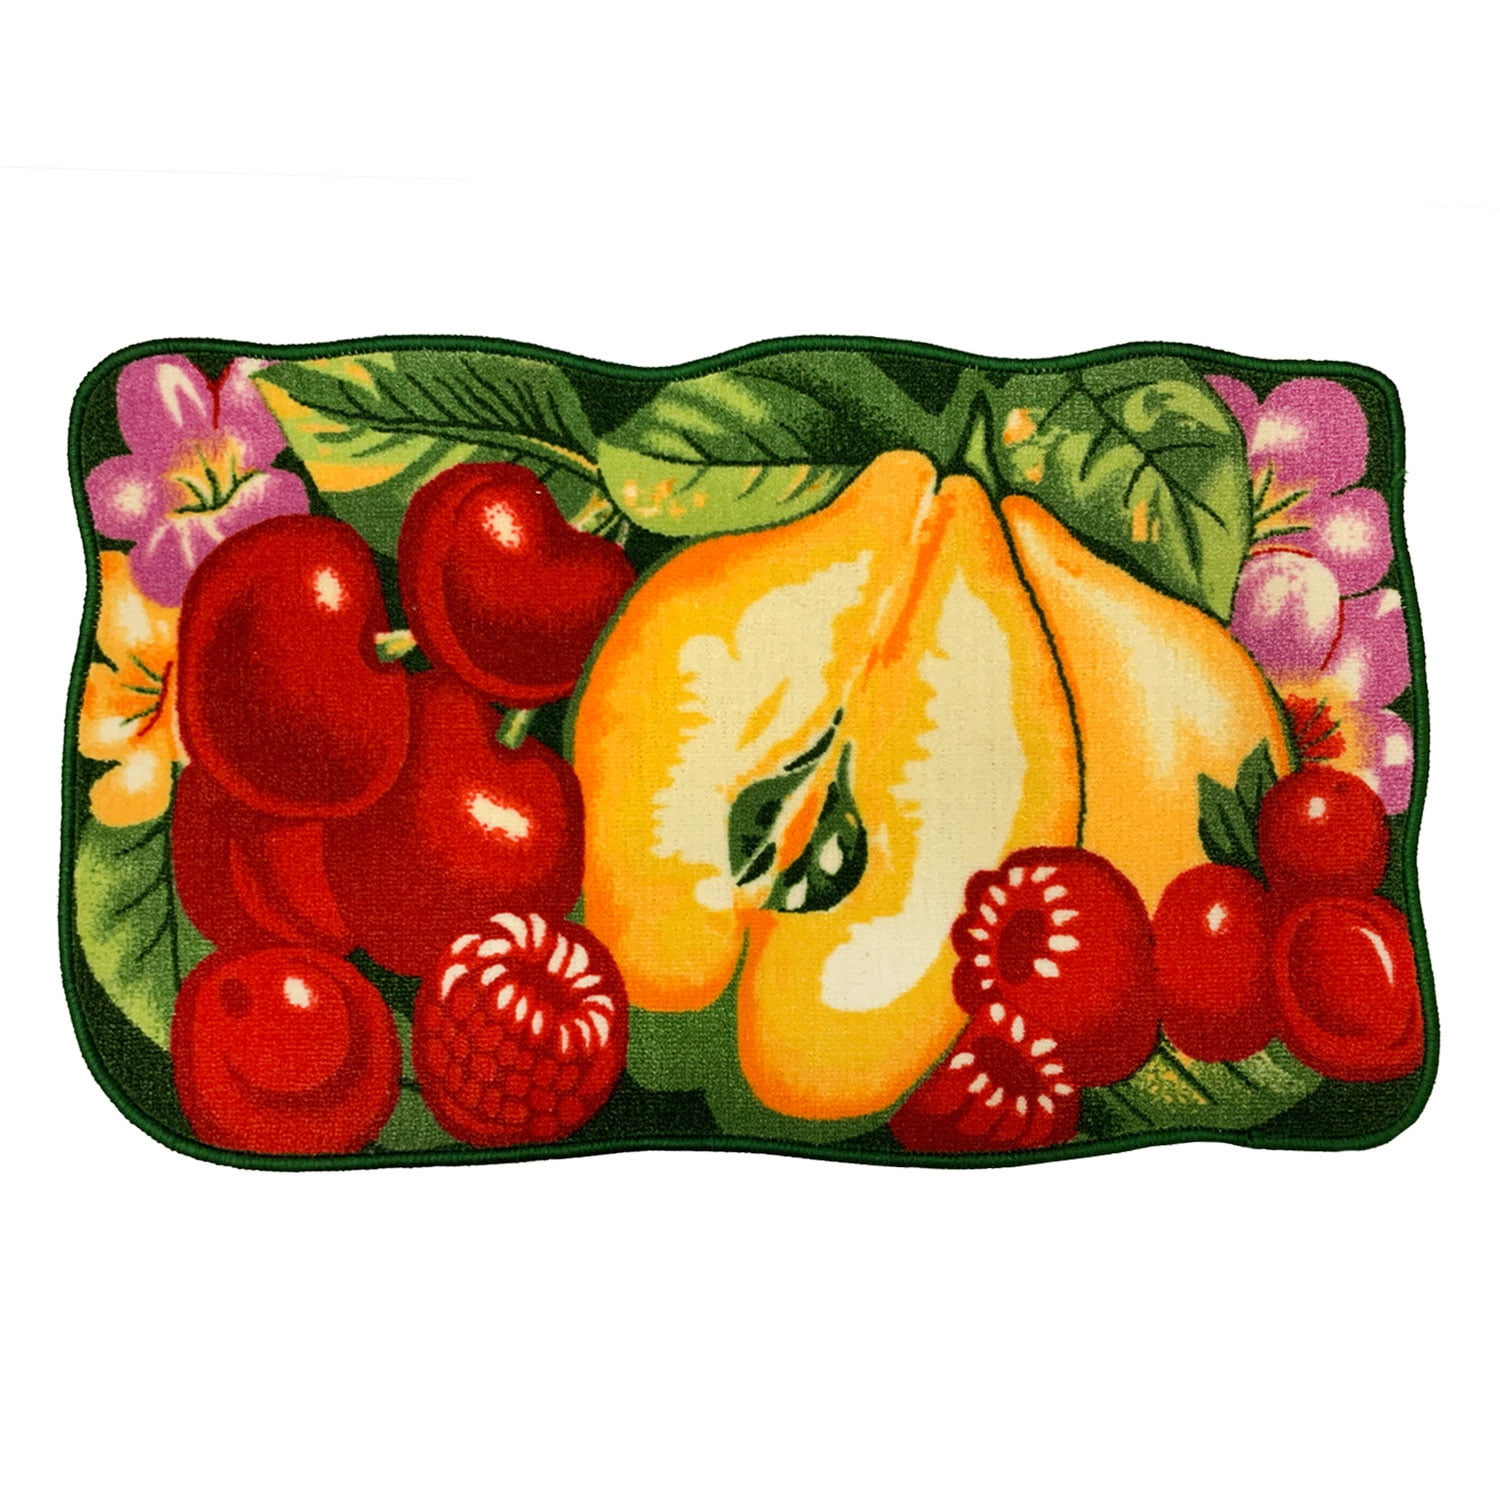 FRUITS Polyester Pile back PRINTED RUG Daniel PEARS & RED BERRIES 19"x32" 